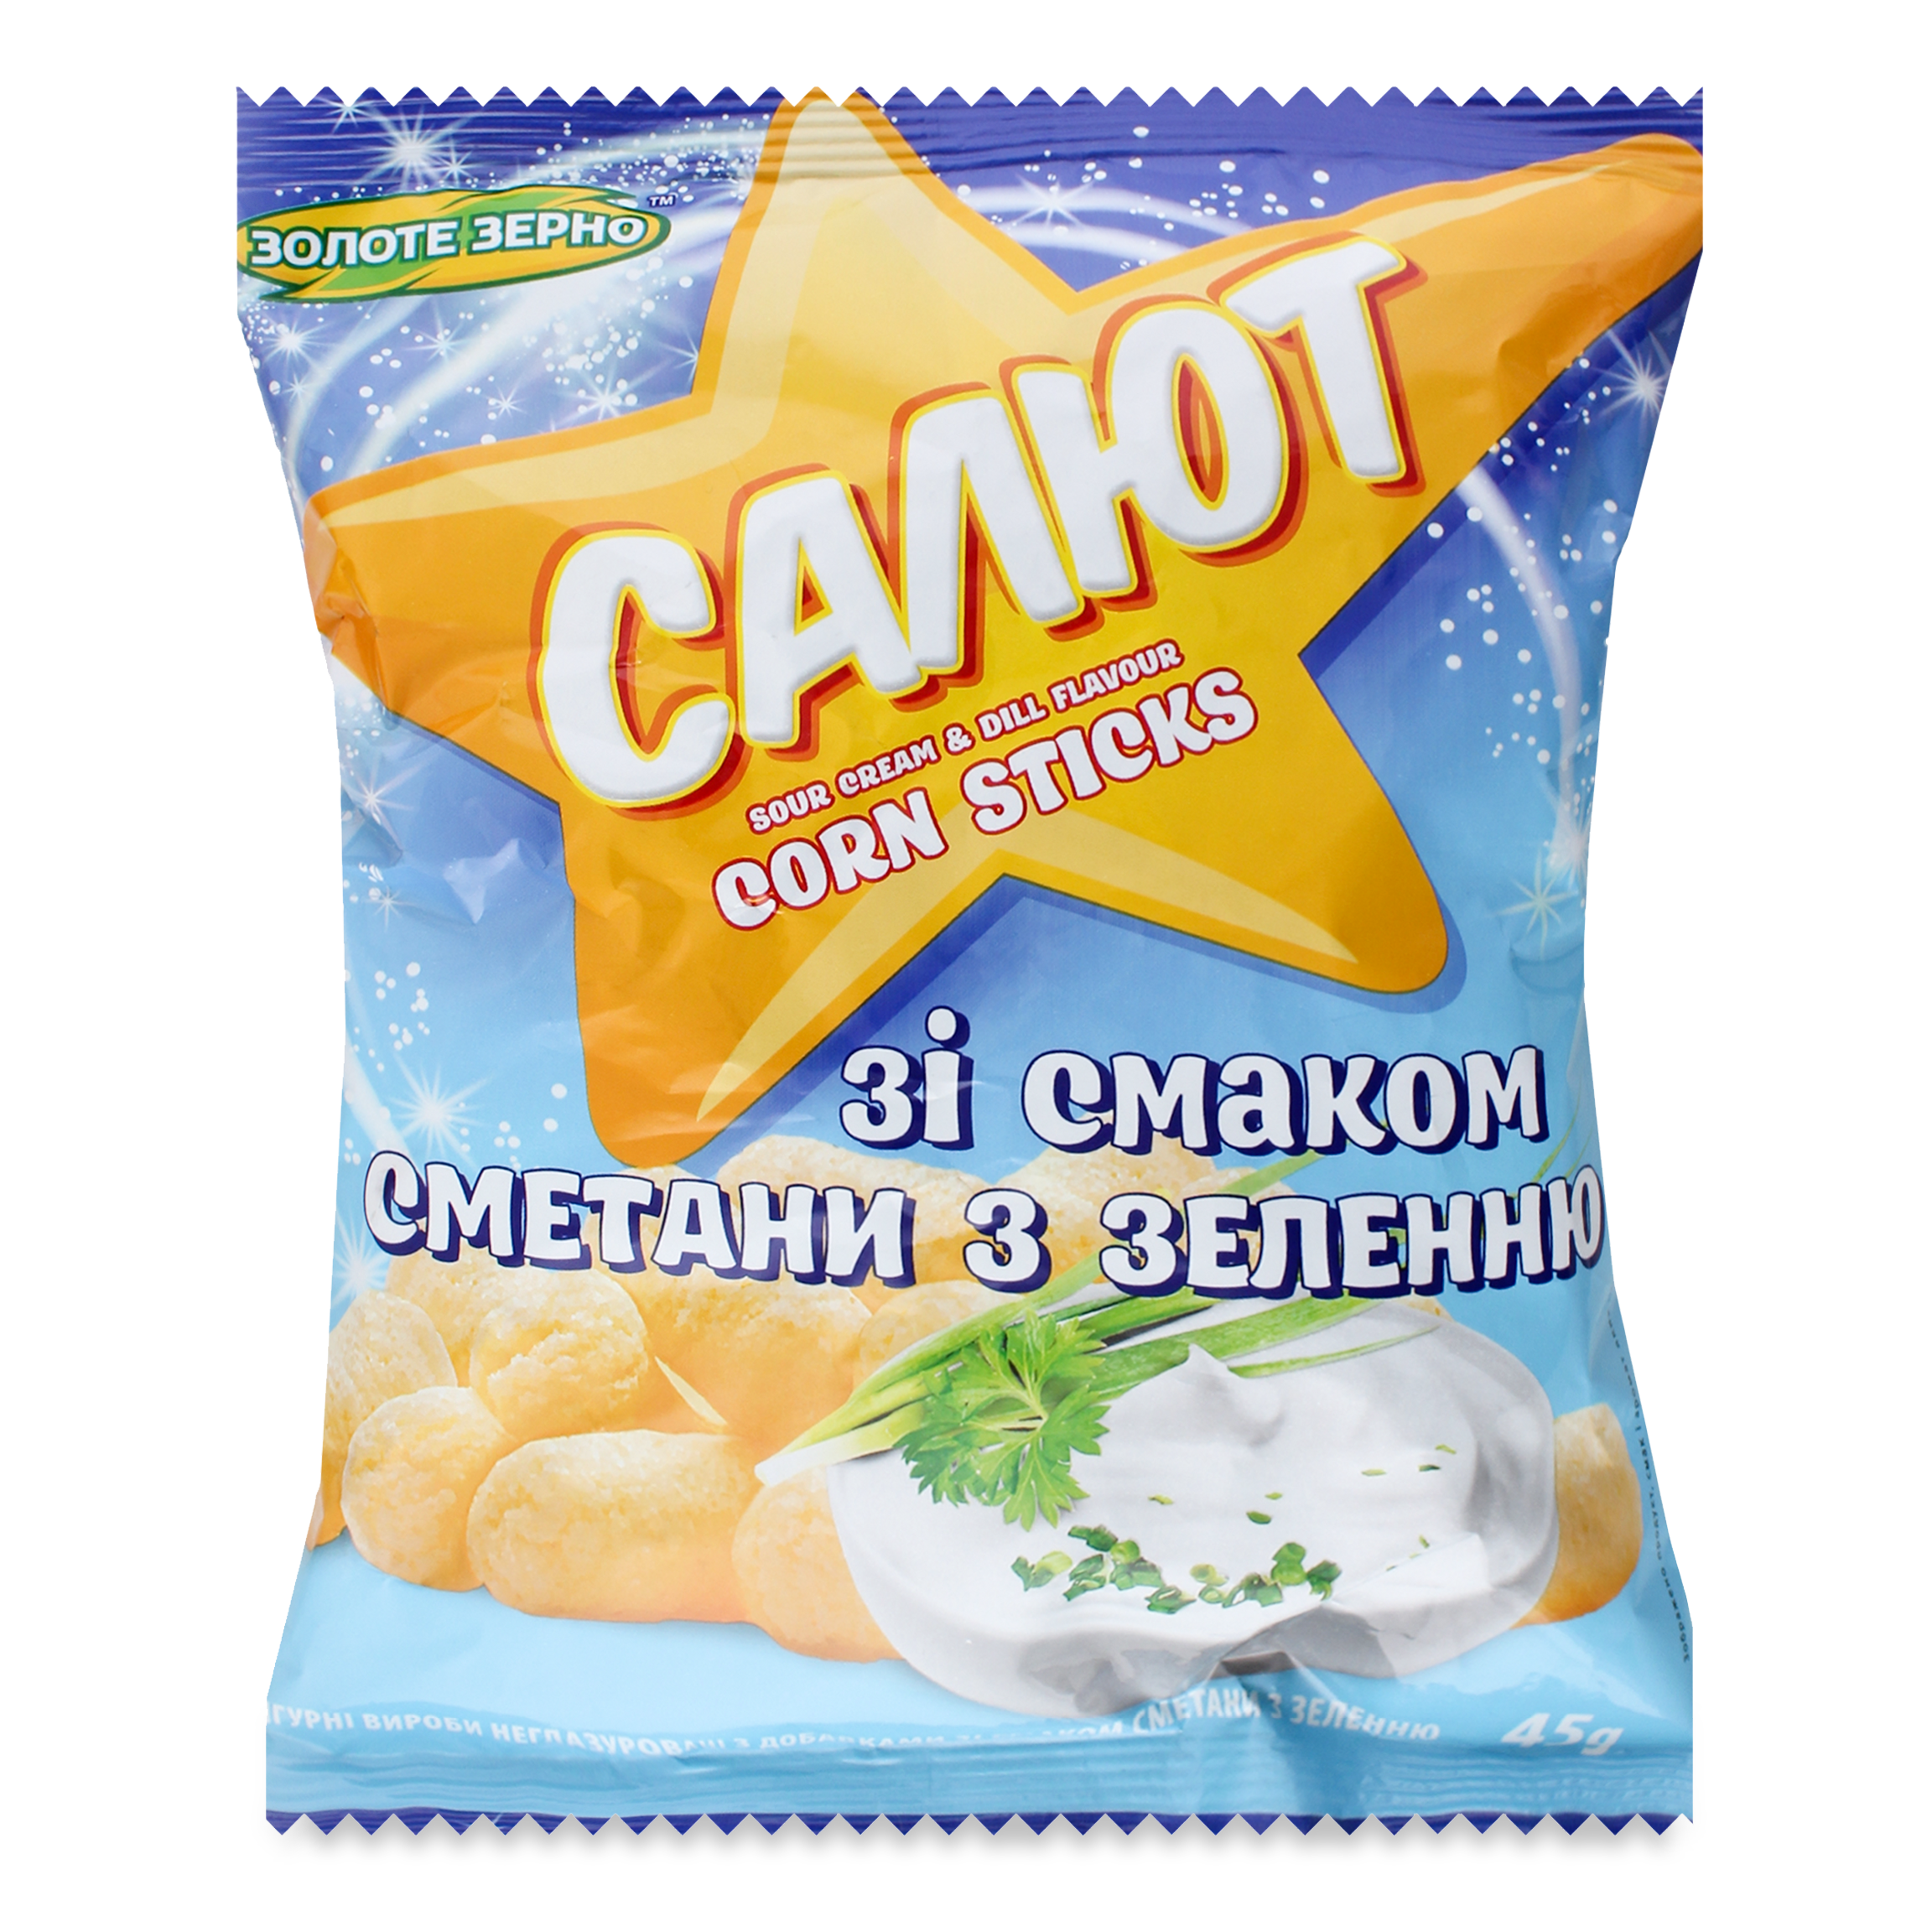 Zolote Zerno Salute Figured Snacks with Sour Cream 45g